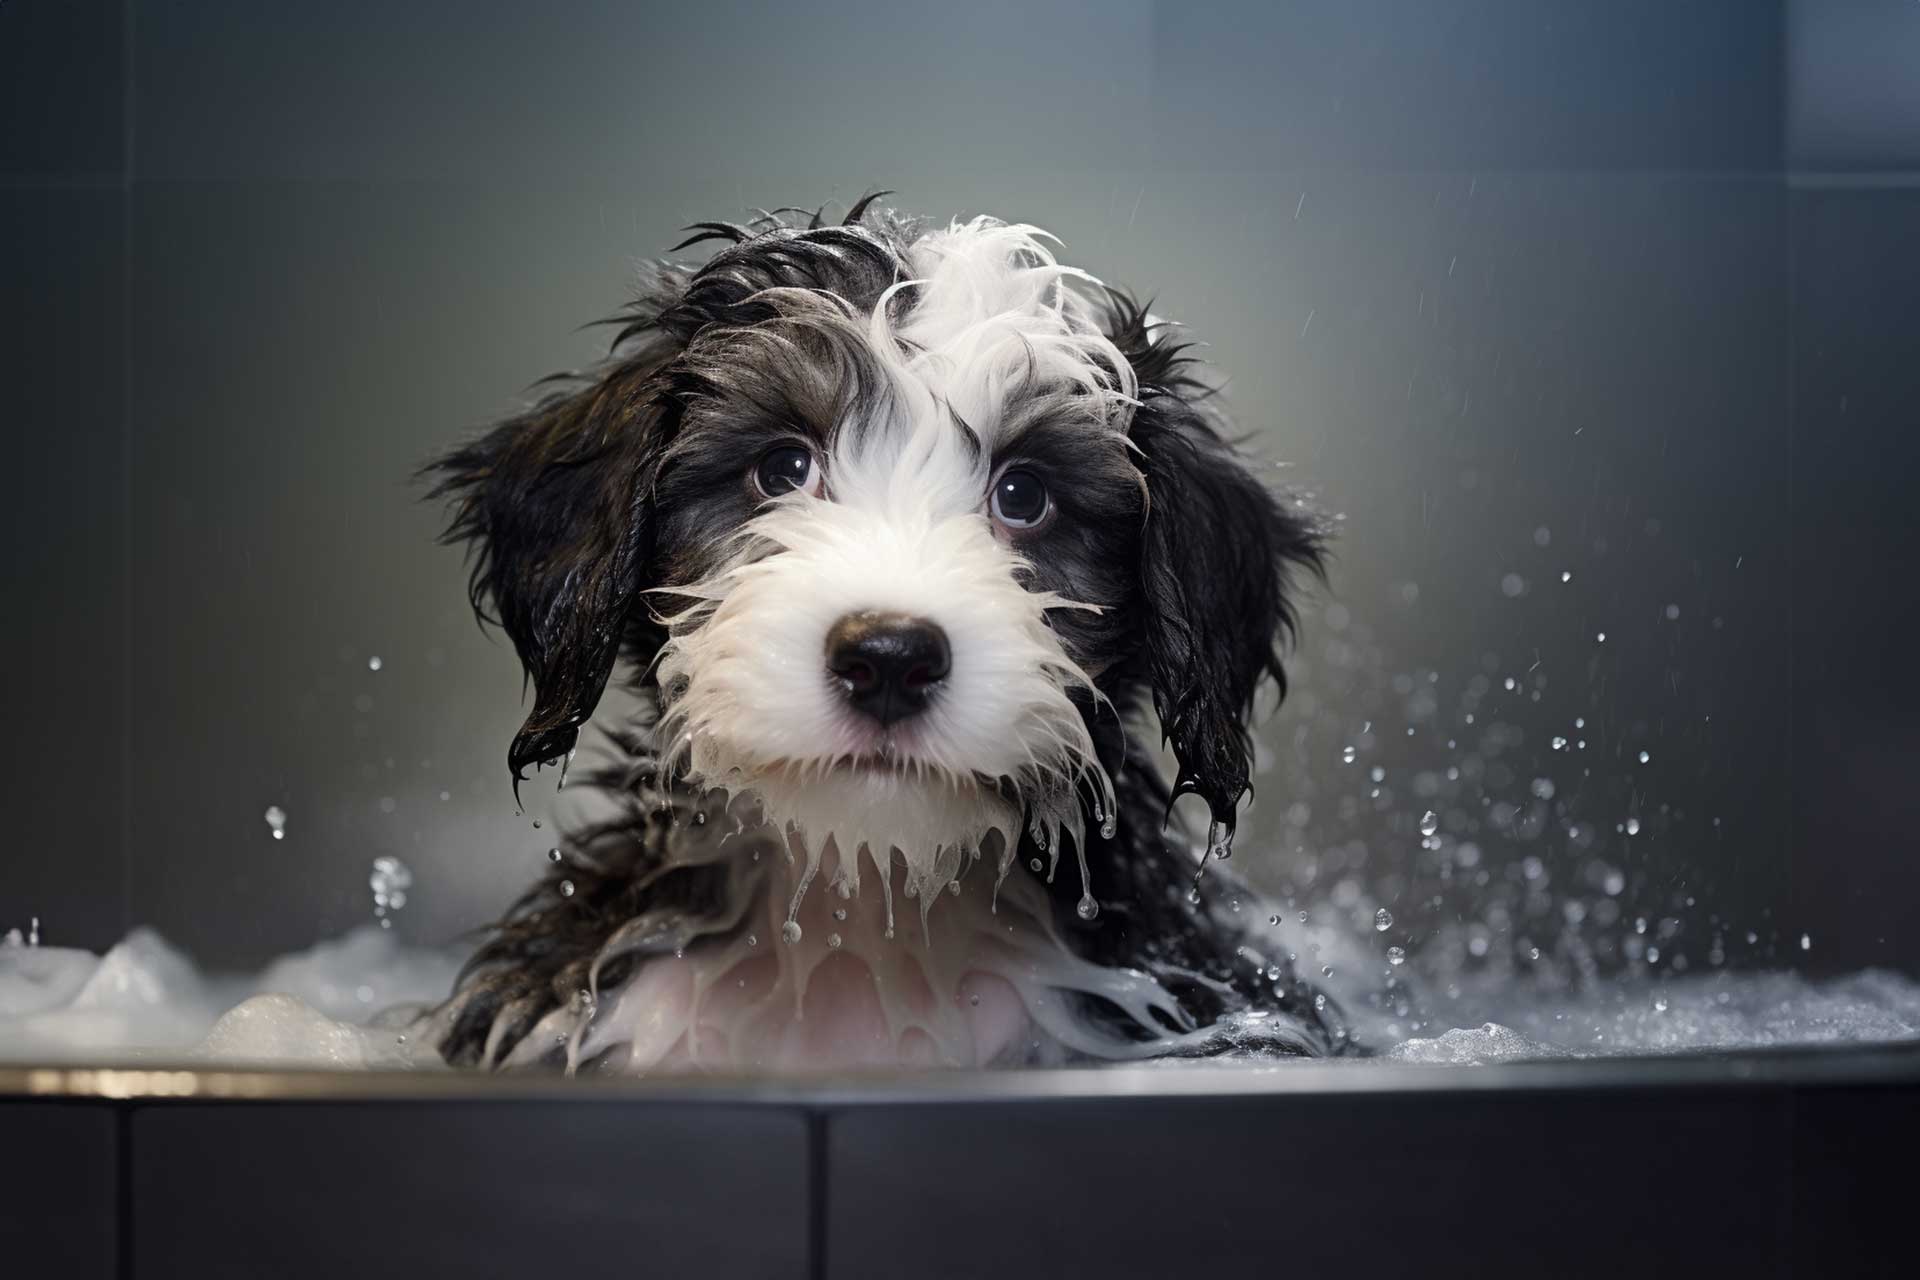 Mini Sheepadoodle puppy taking a bath at the groomers